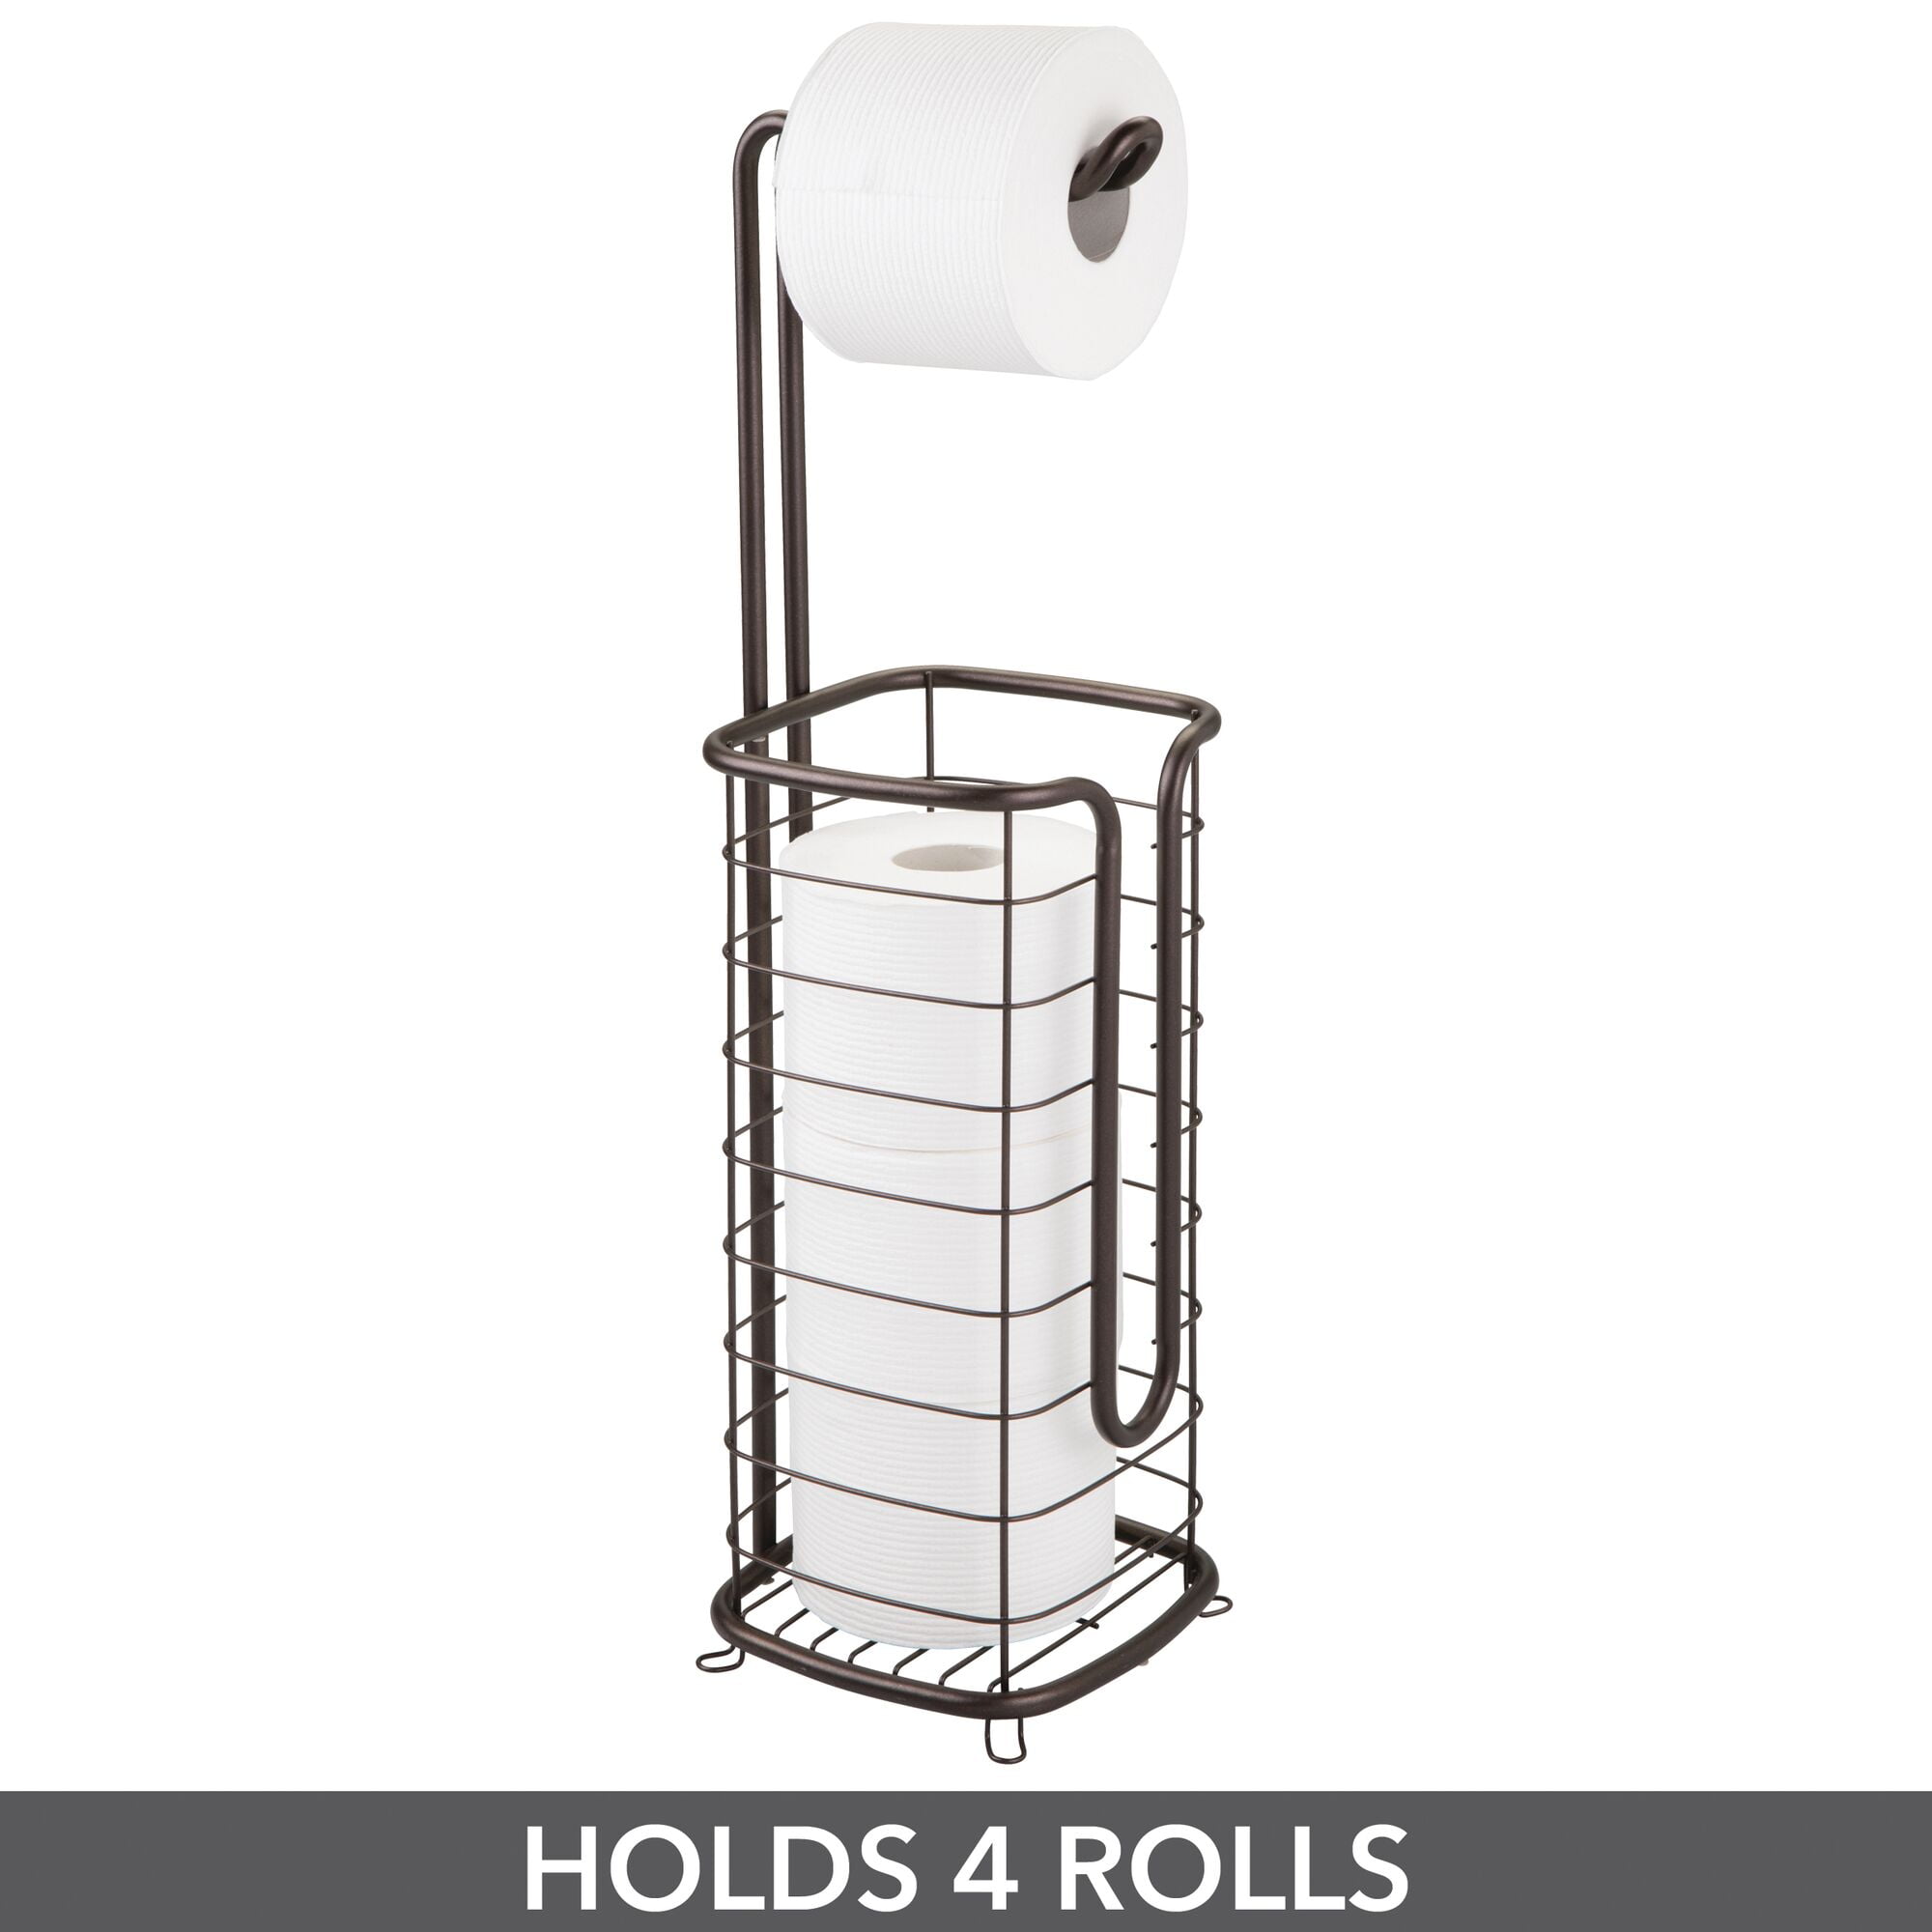 SunnyPoint Free Standing Bathroom Toilet Paper Holder Stand with Reserve, Reserve Area Has Enough Space for Jumbo Roll (Chrome)